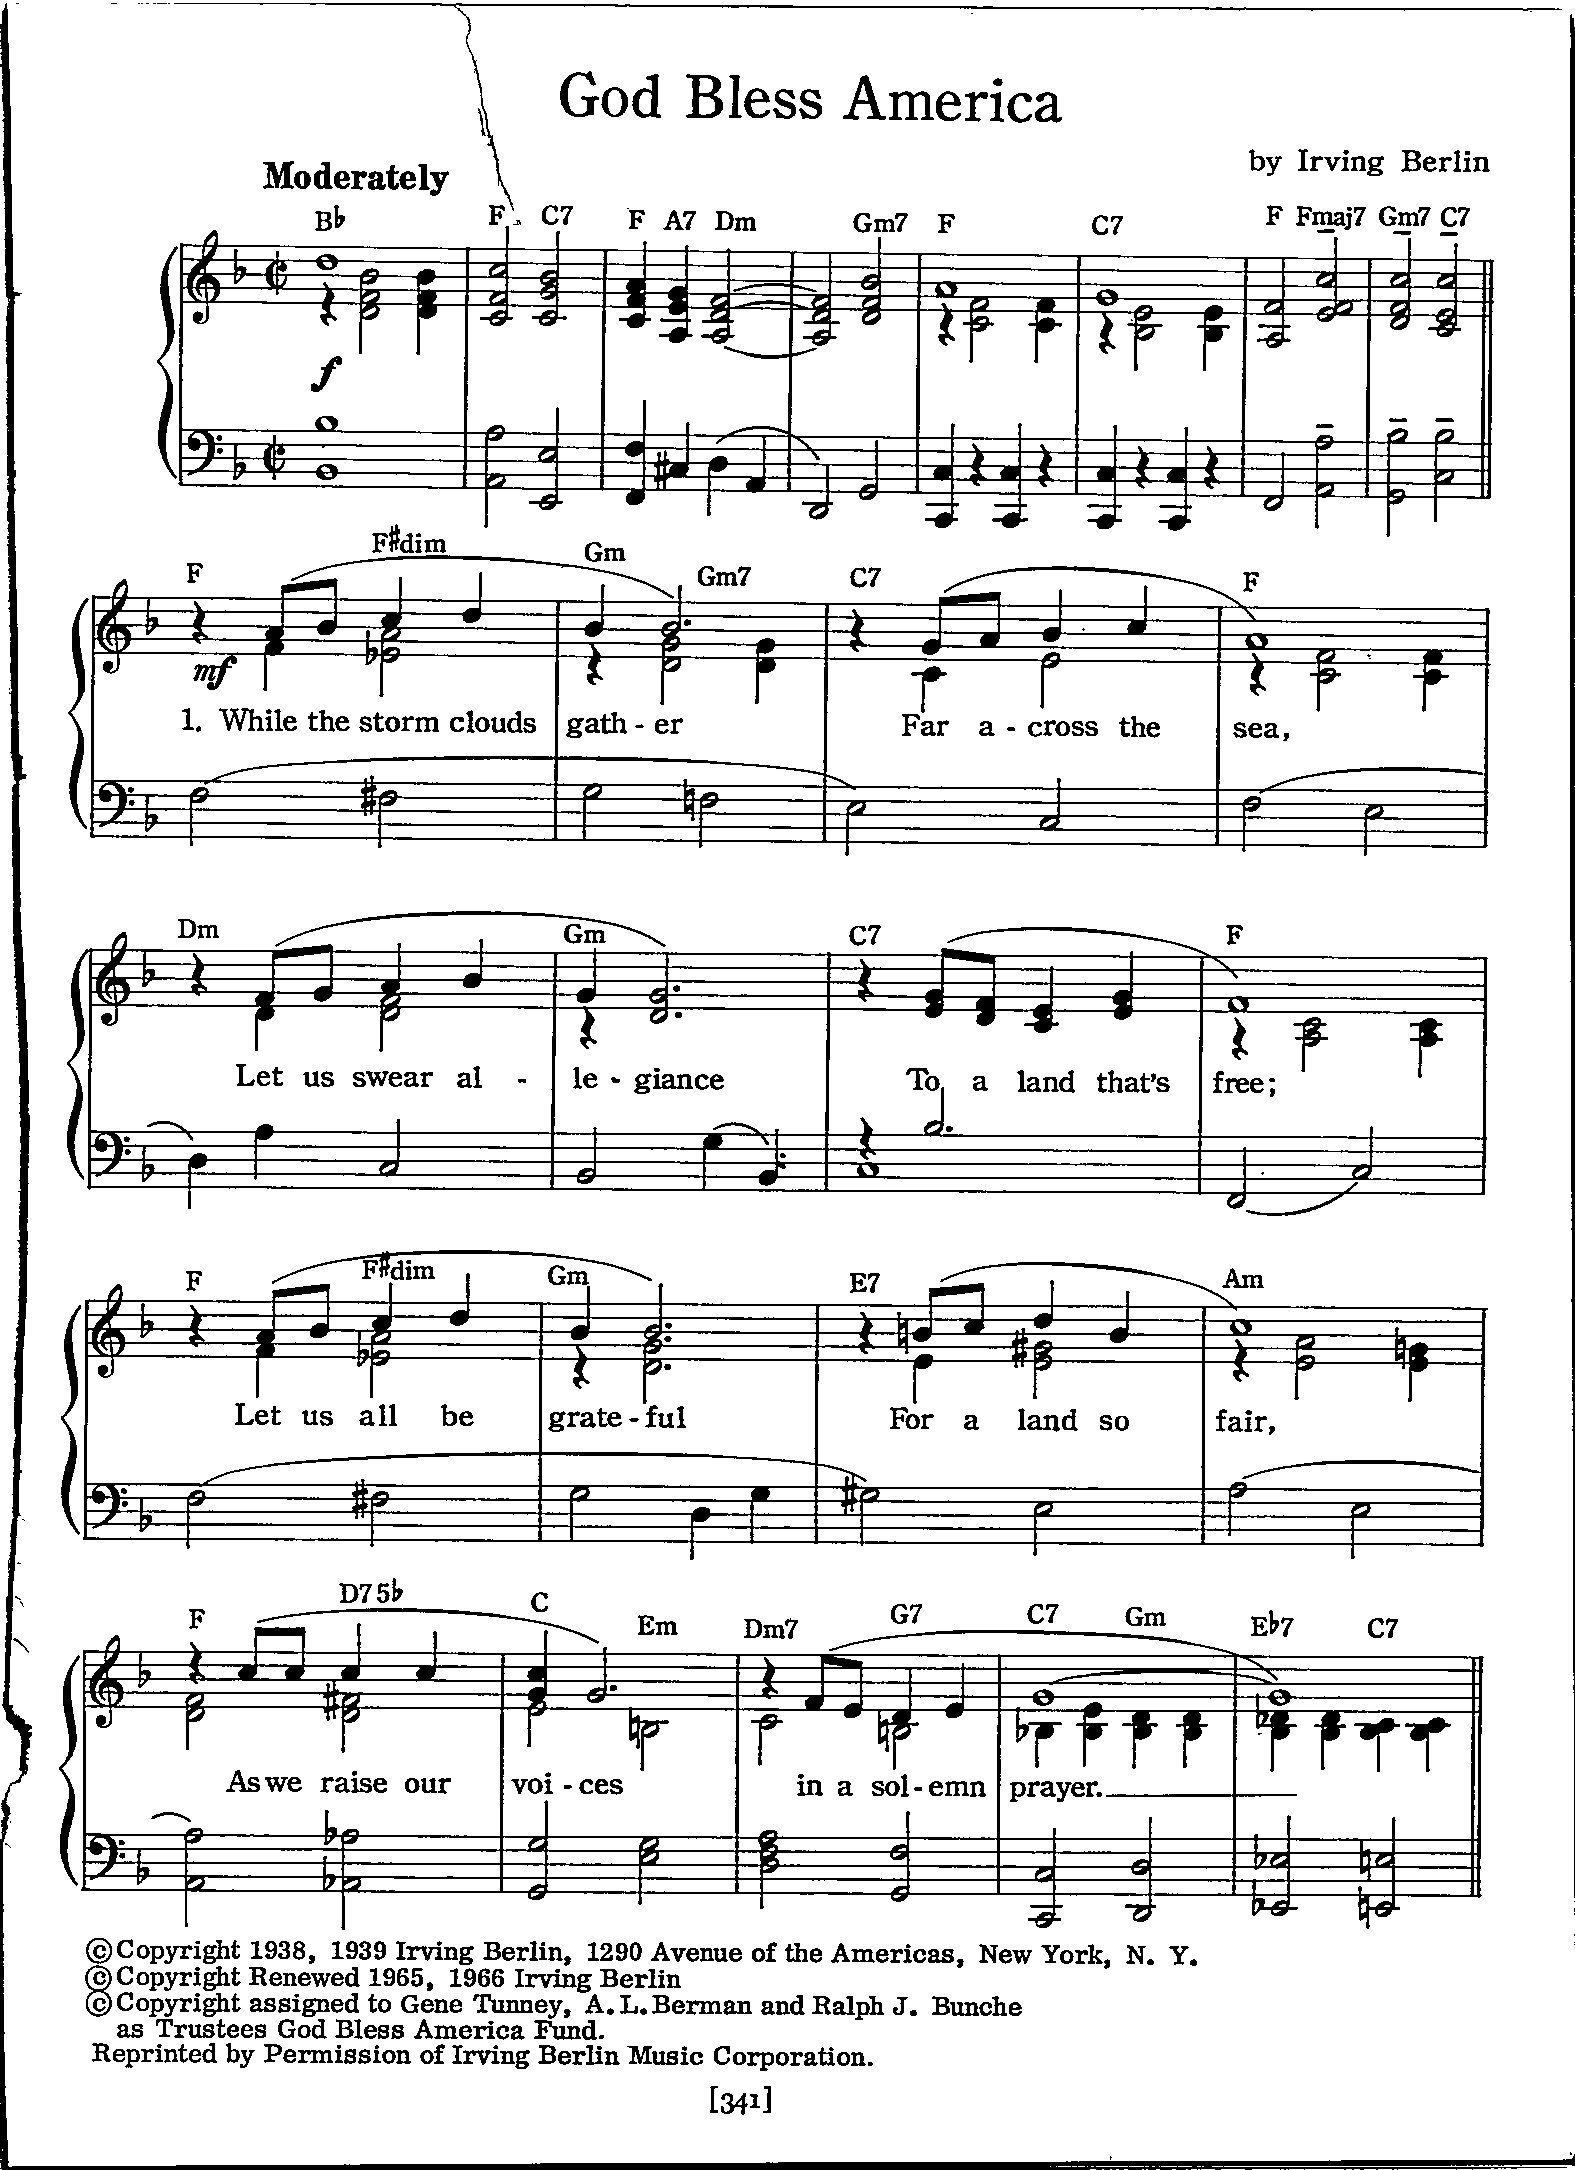 God Bless America Sheet Music Digital Patriotic Tune Key Of F For Piano And Voice Etsy Finland